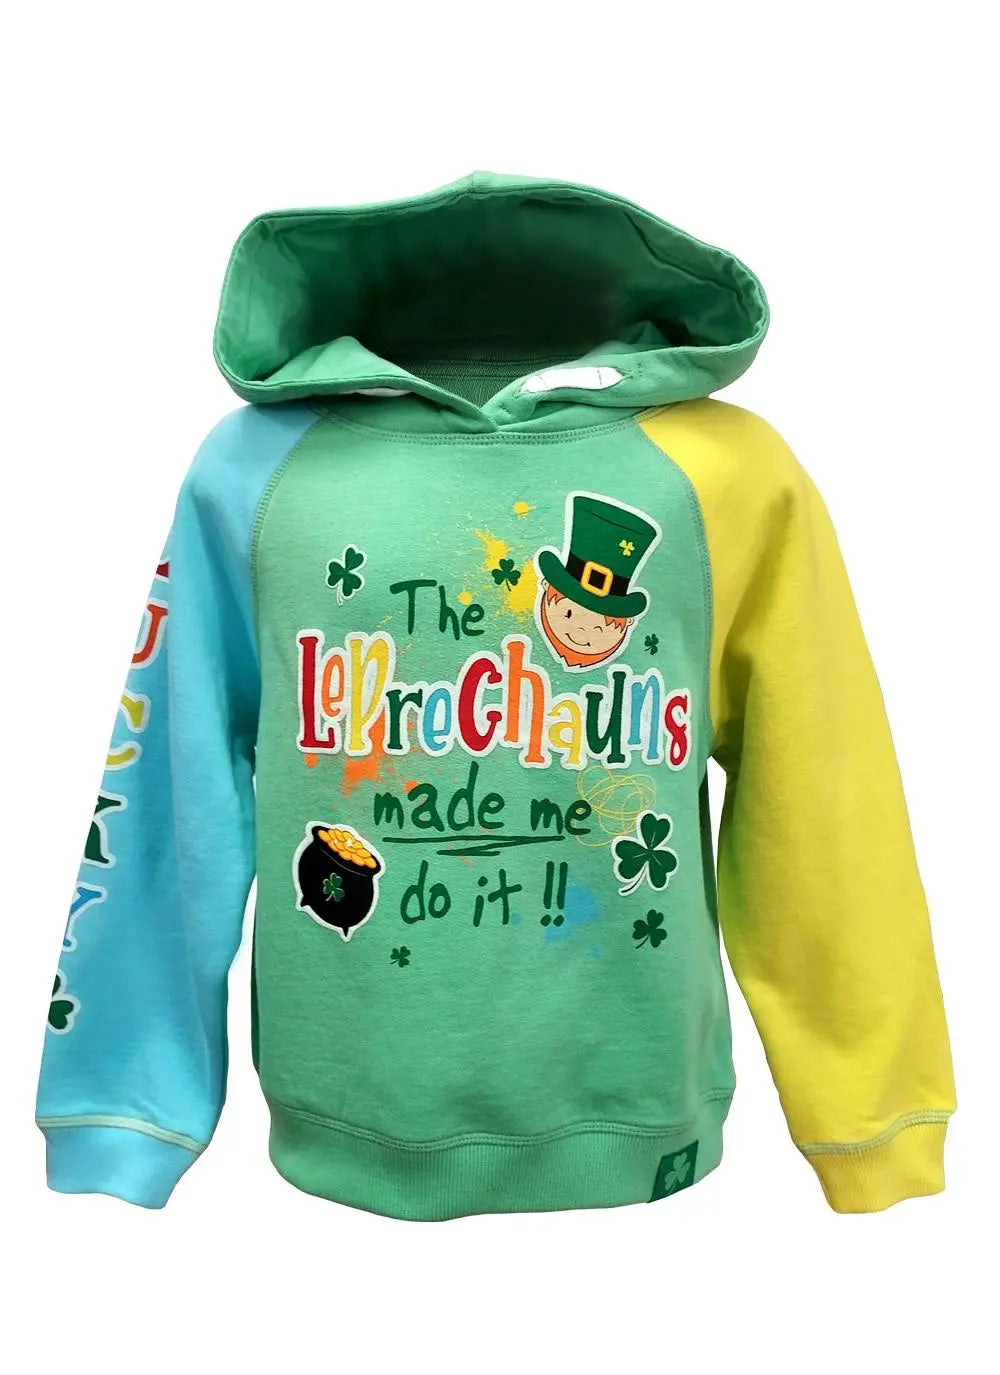 The Leprechauns made me do it Hoodie T7626